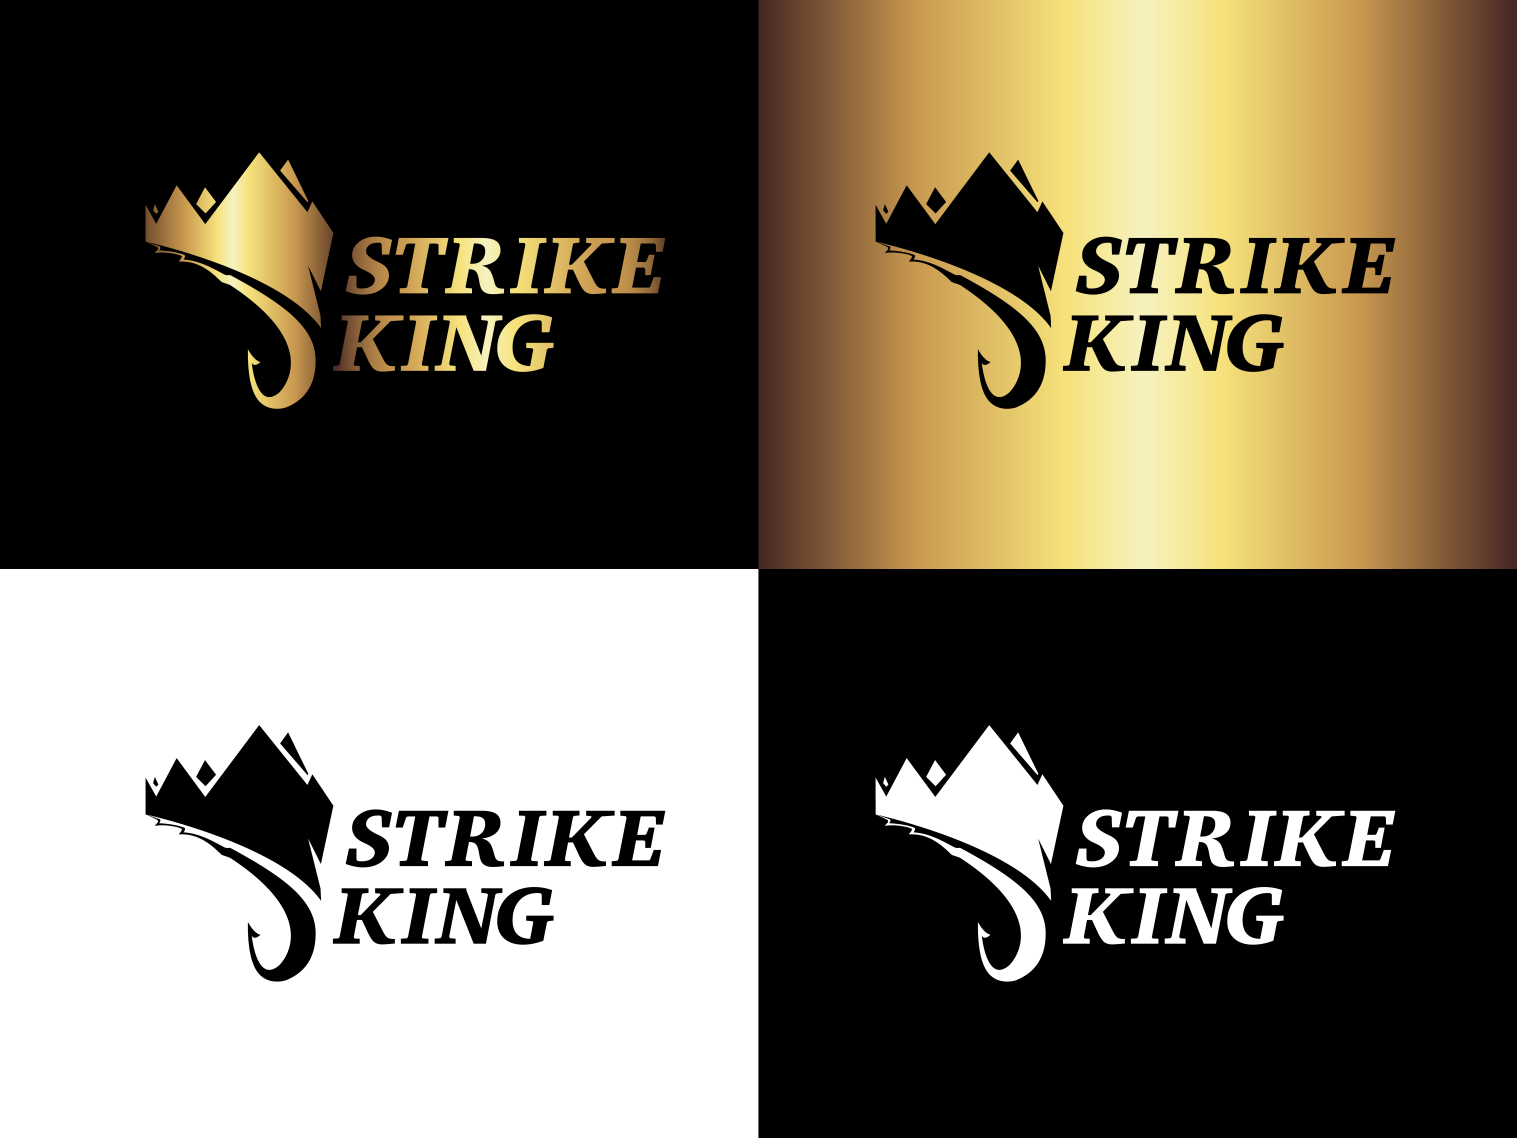 Strike King Lure Company Logo Redesign Concept by Matthew Mitchell